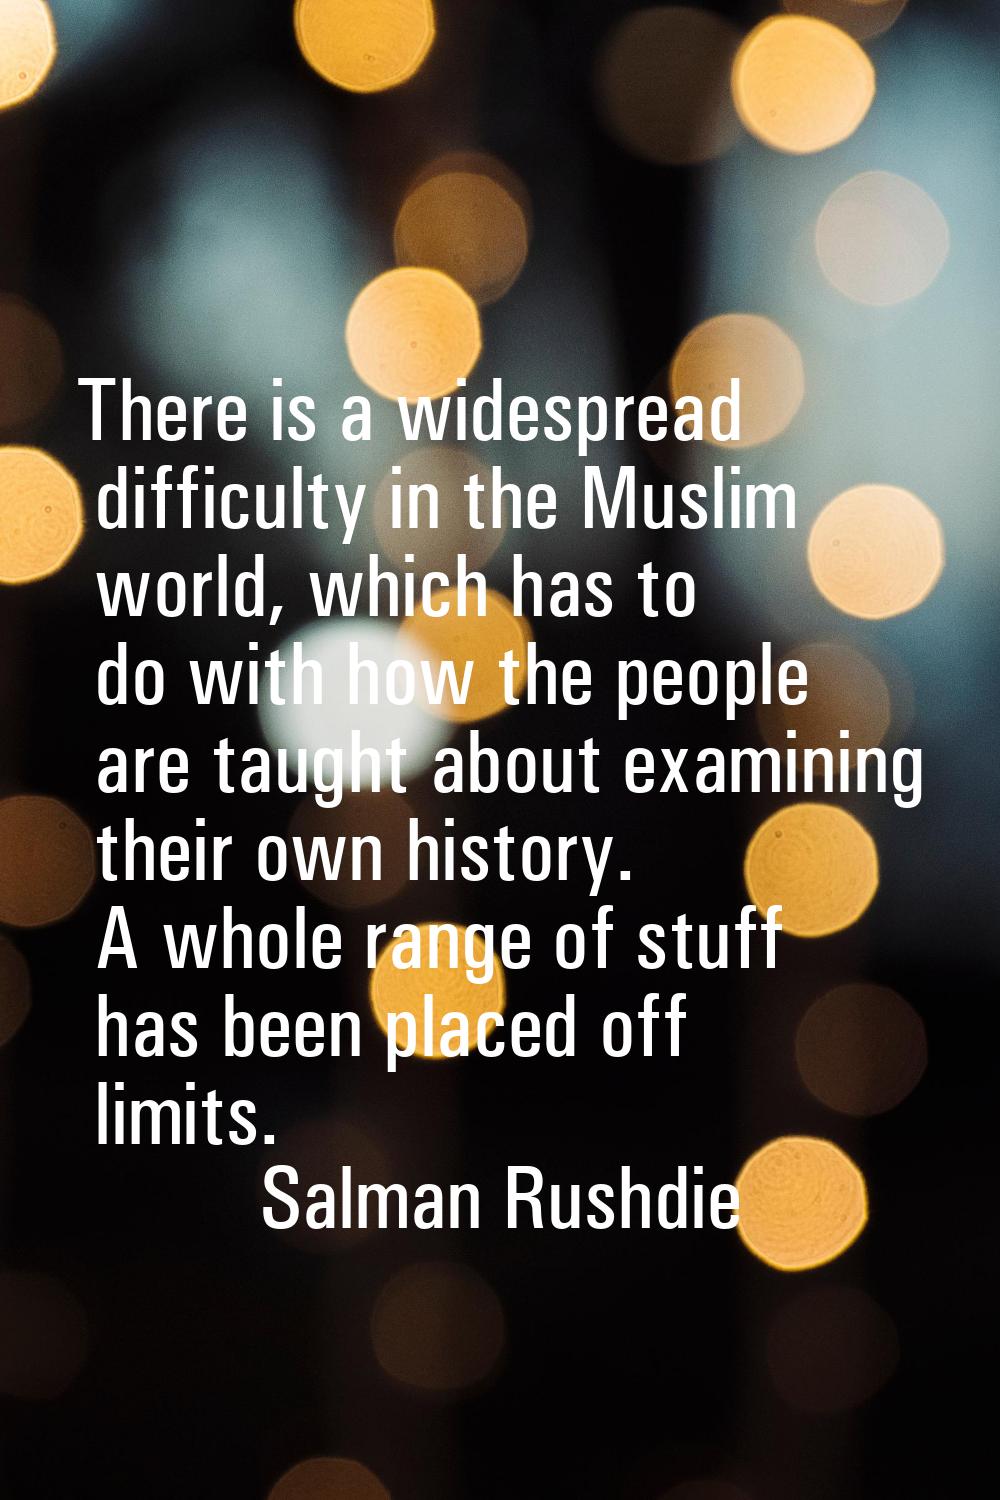 There is a widespread difficulty in the Muslim world, which has to do with how the people are taugh